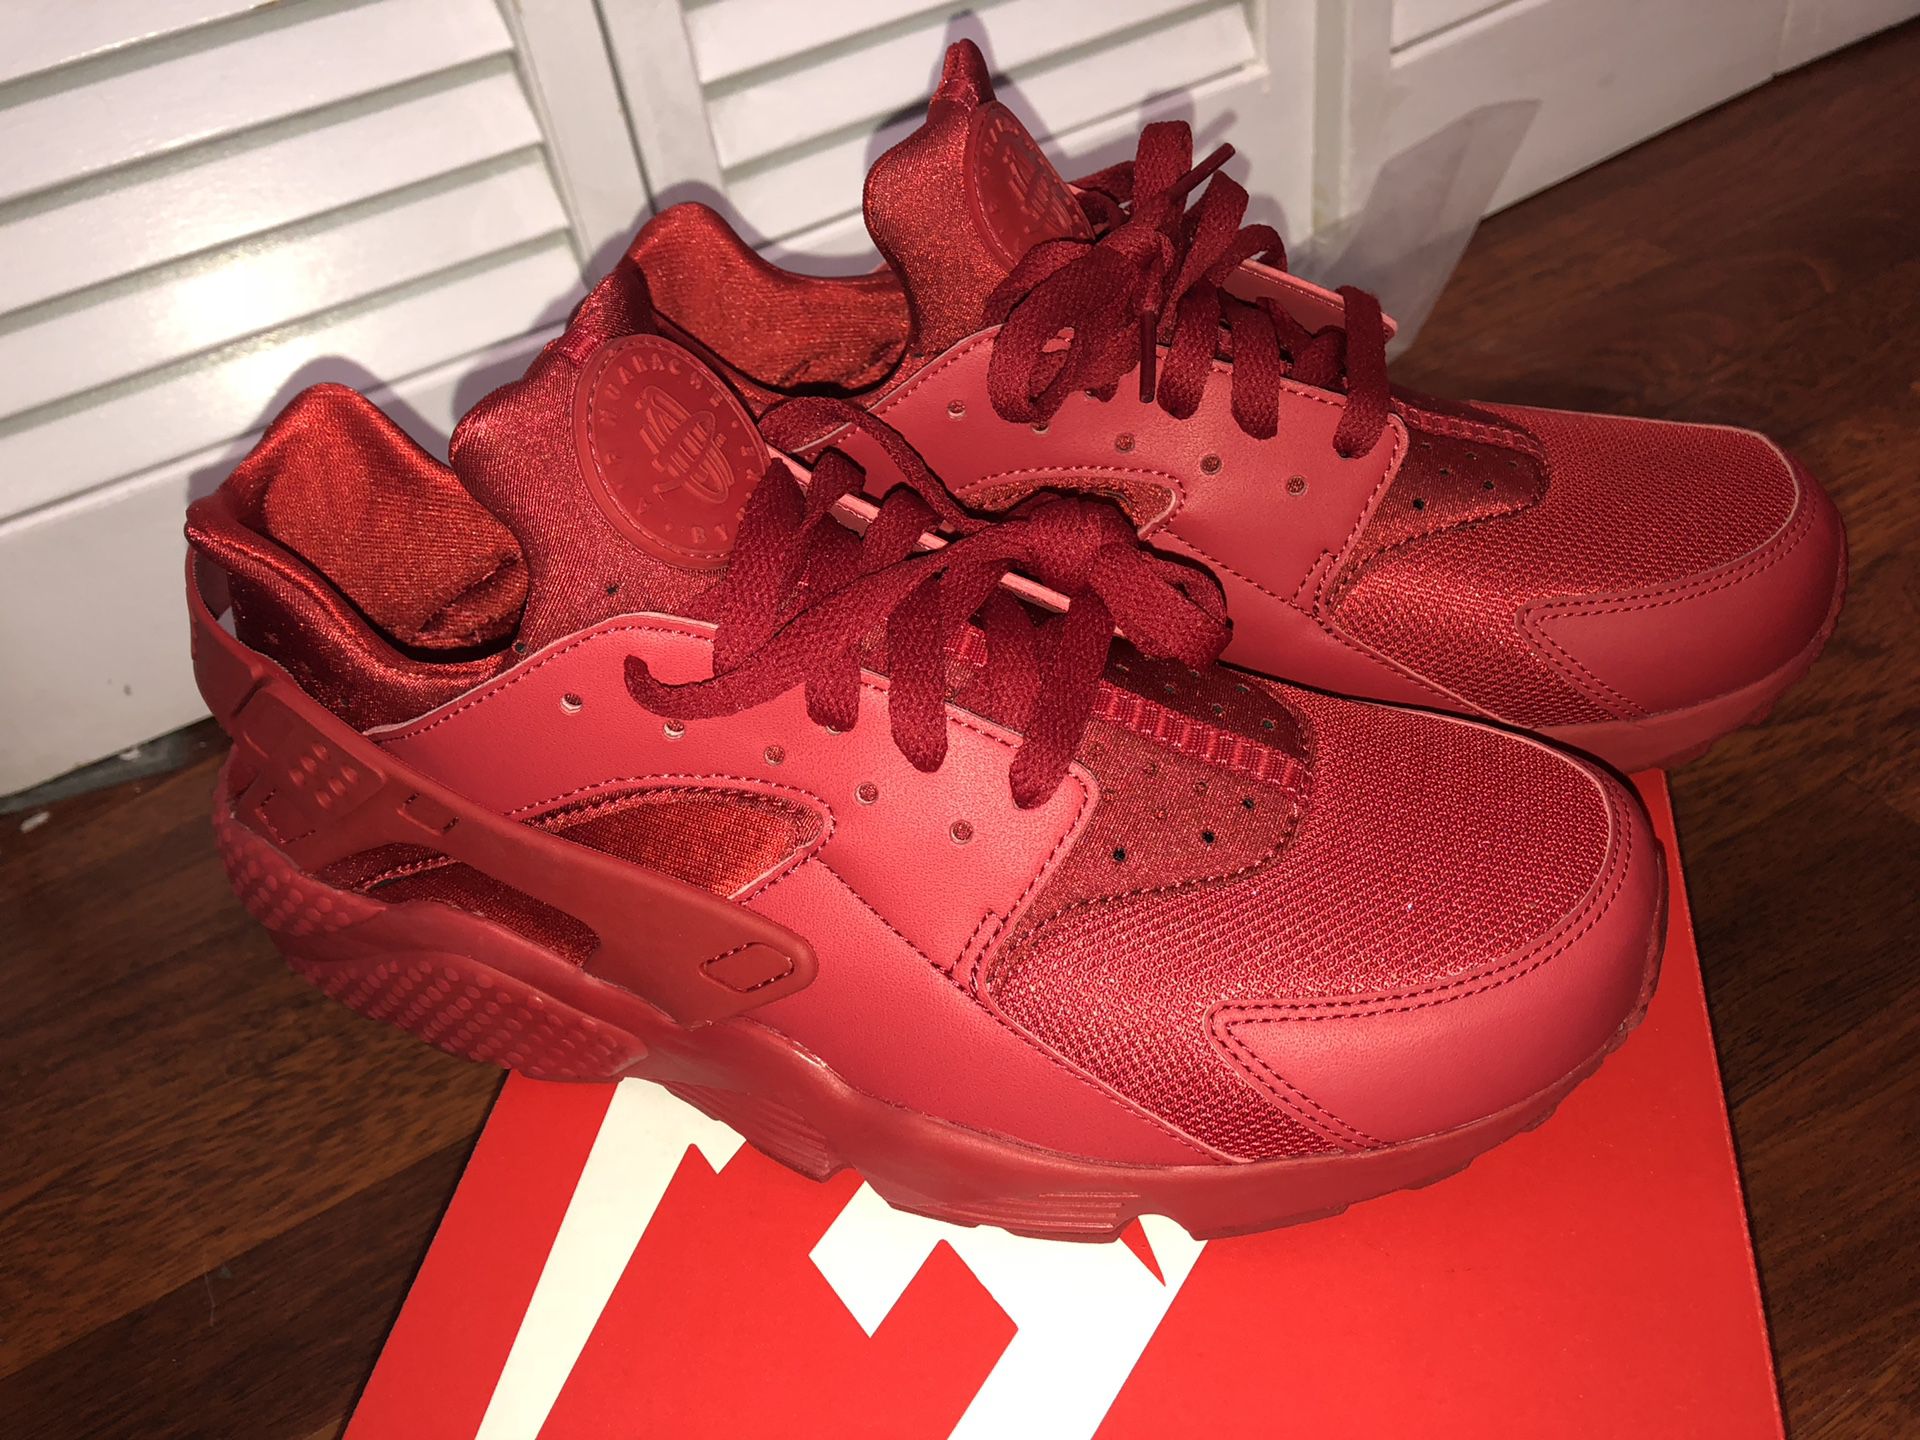 Huaraches Red size 10.5